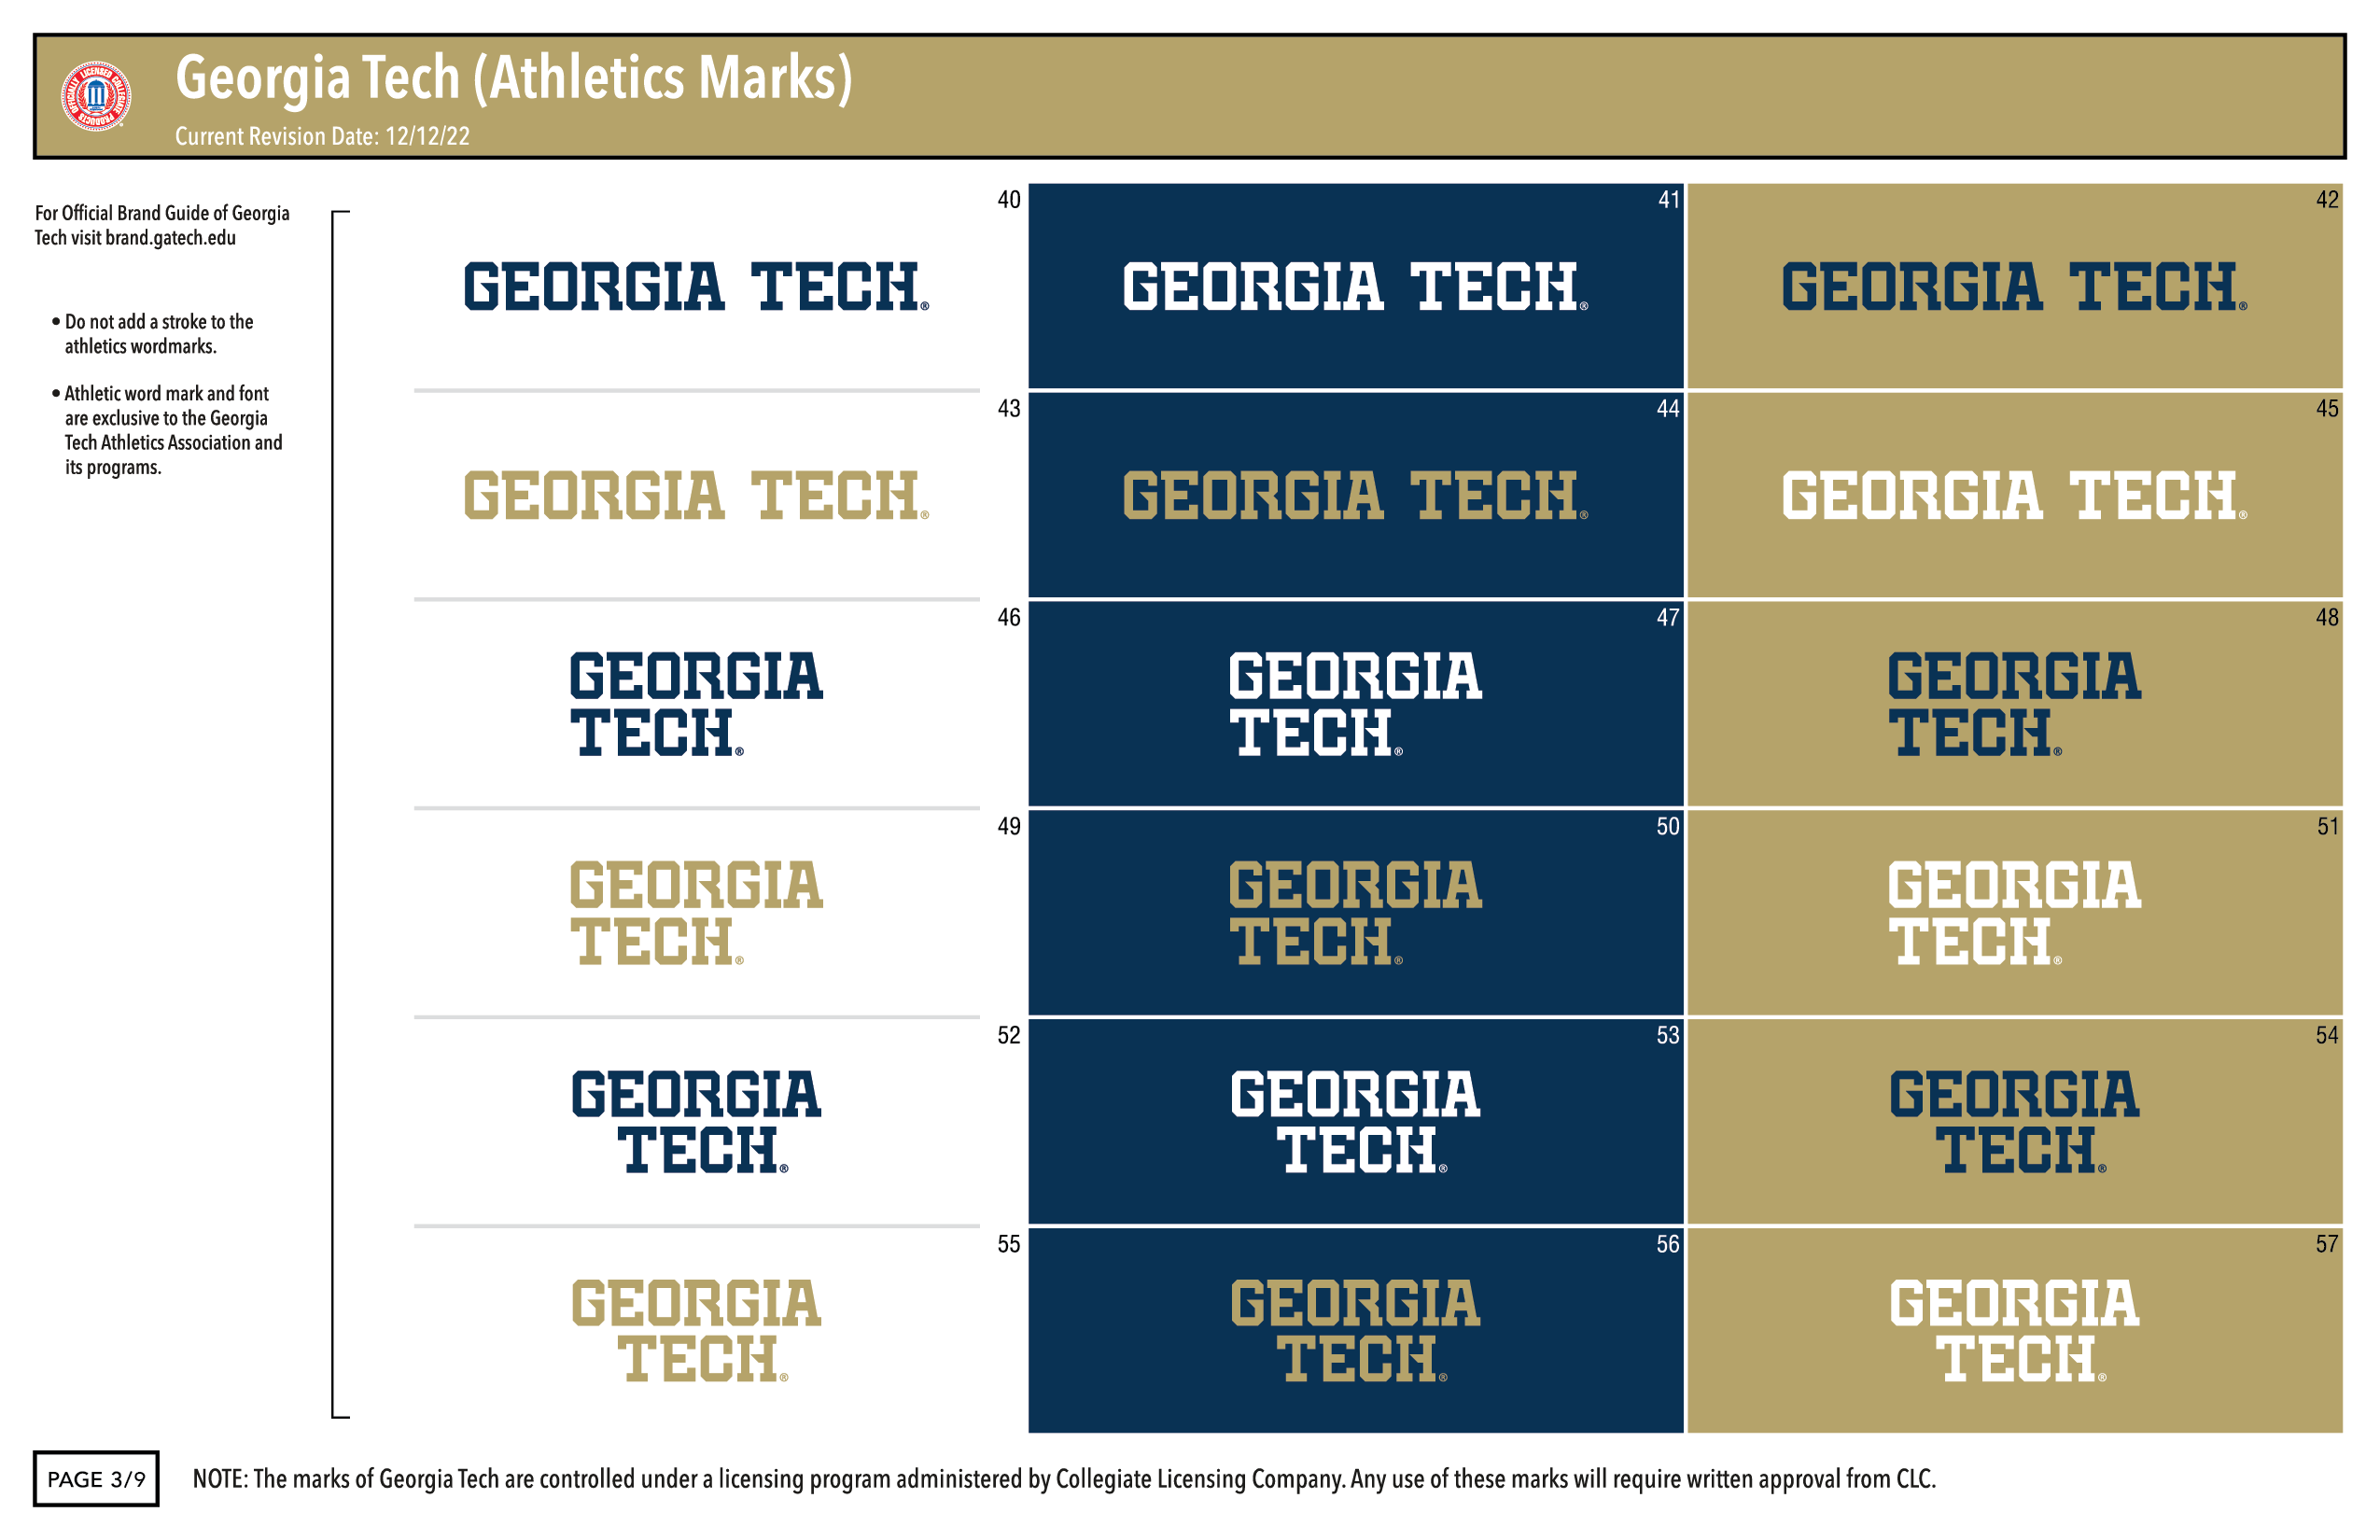 Athletic marks on the 3rd page of the Georgia Tech logo artsheet 